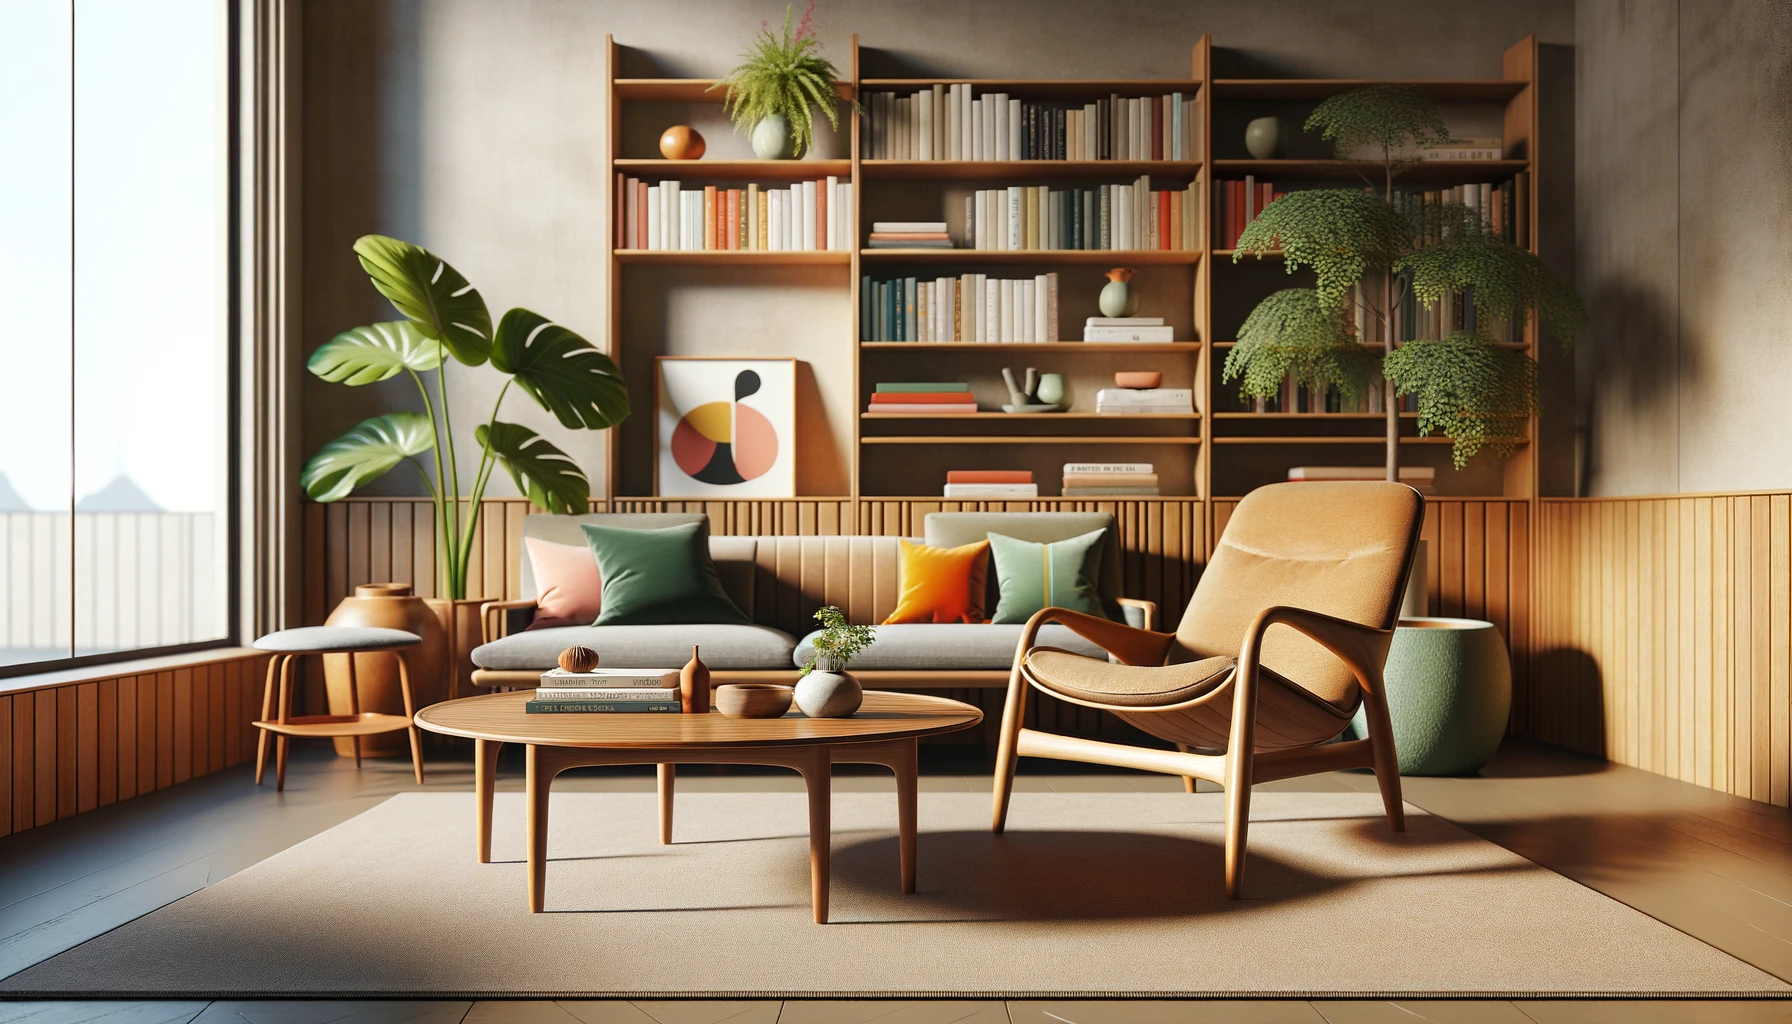 Cozy modern living room with bookshelves and plants.